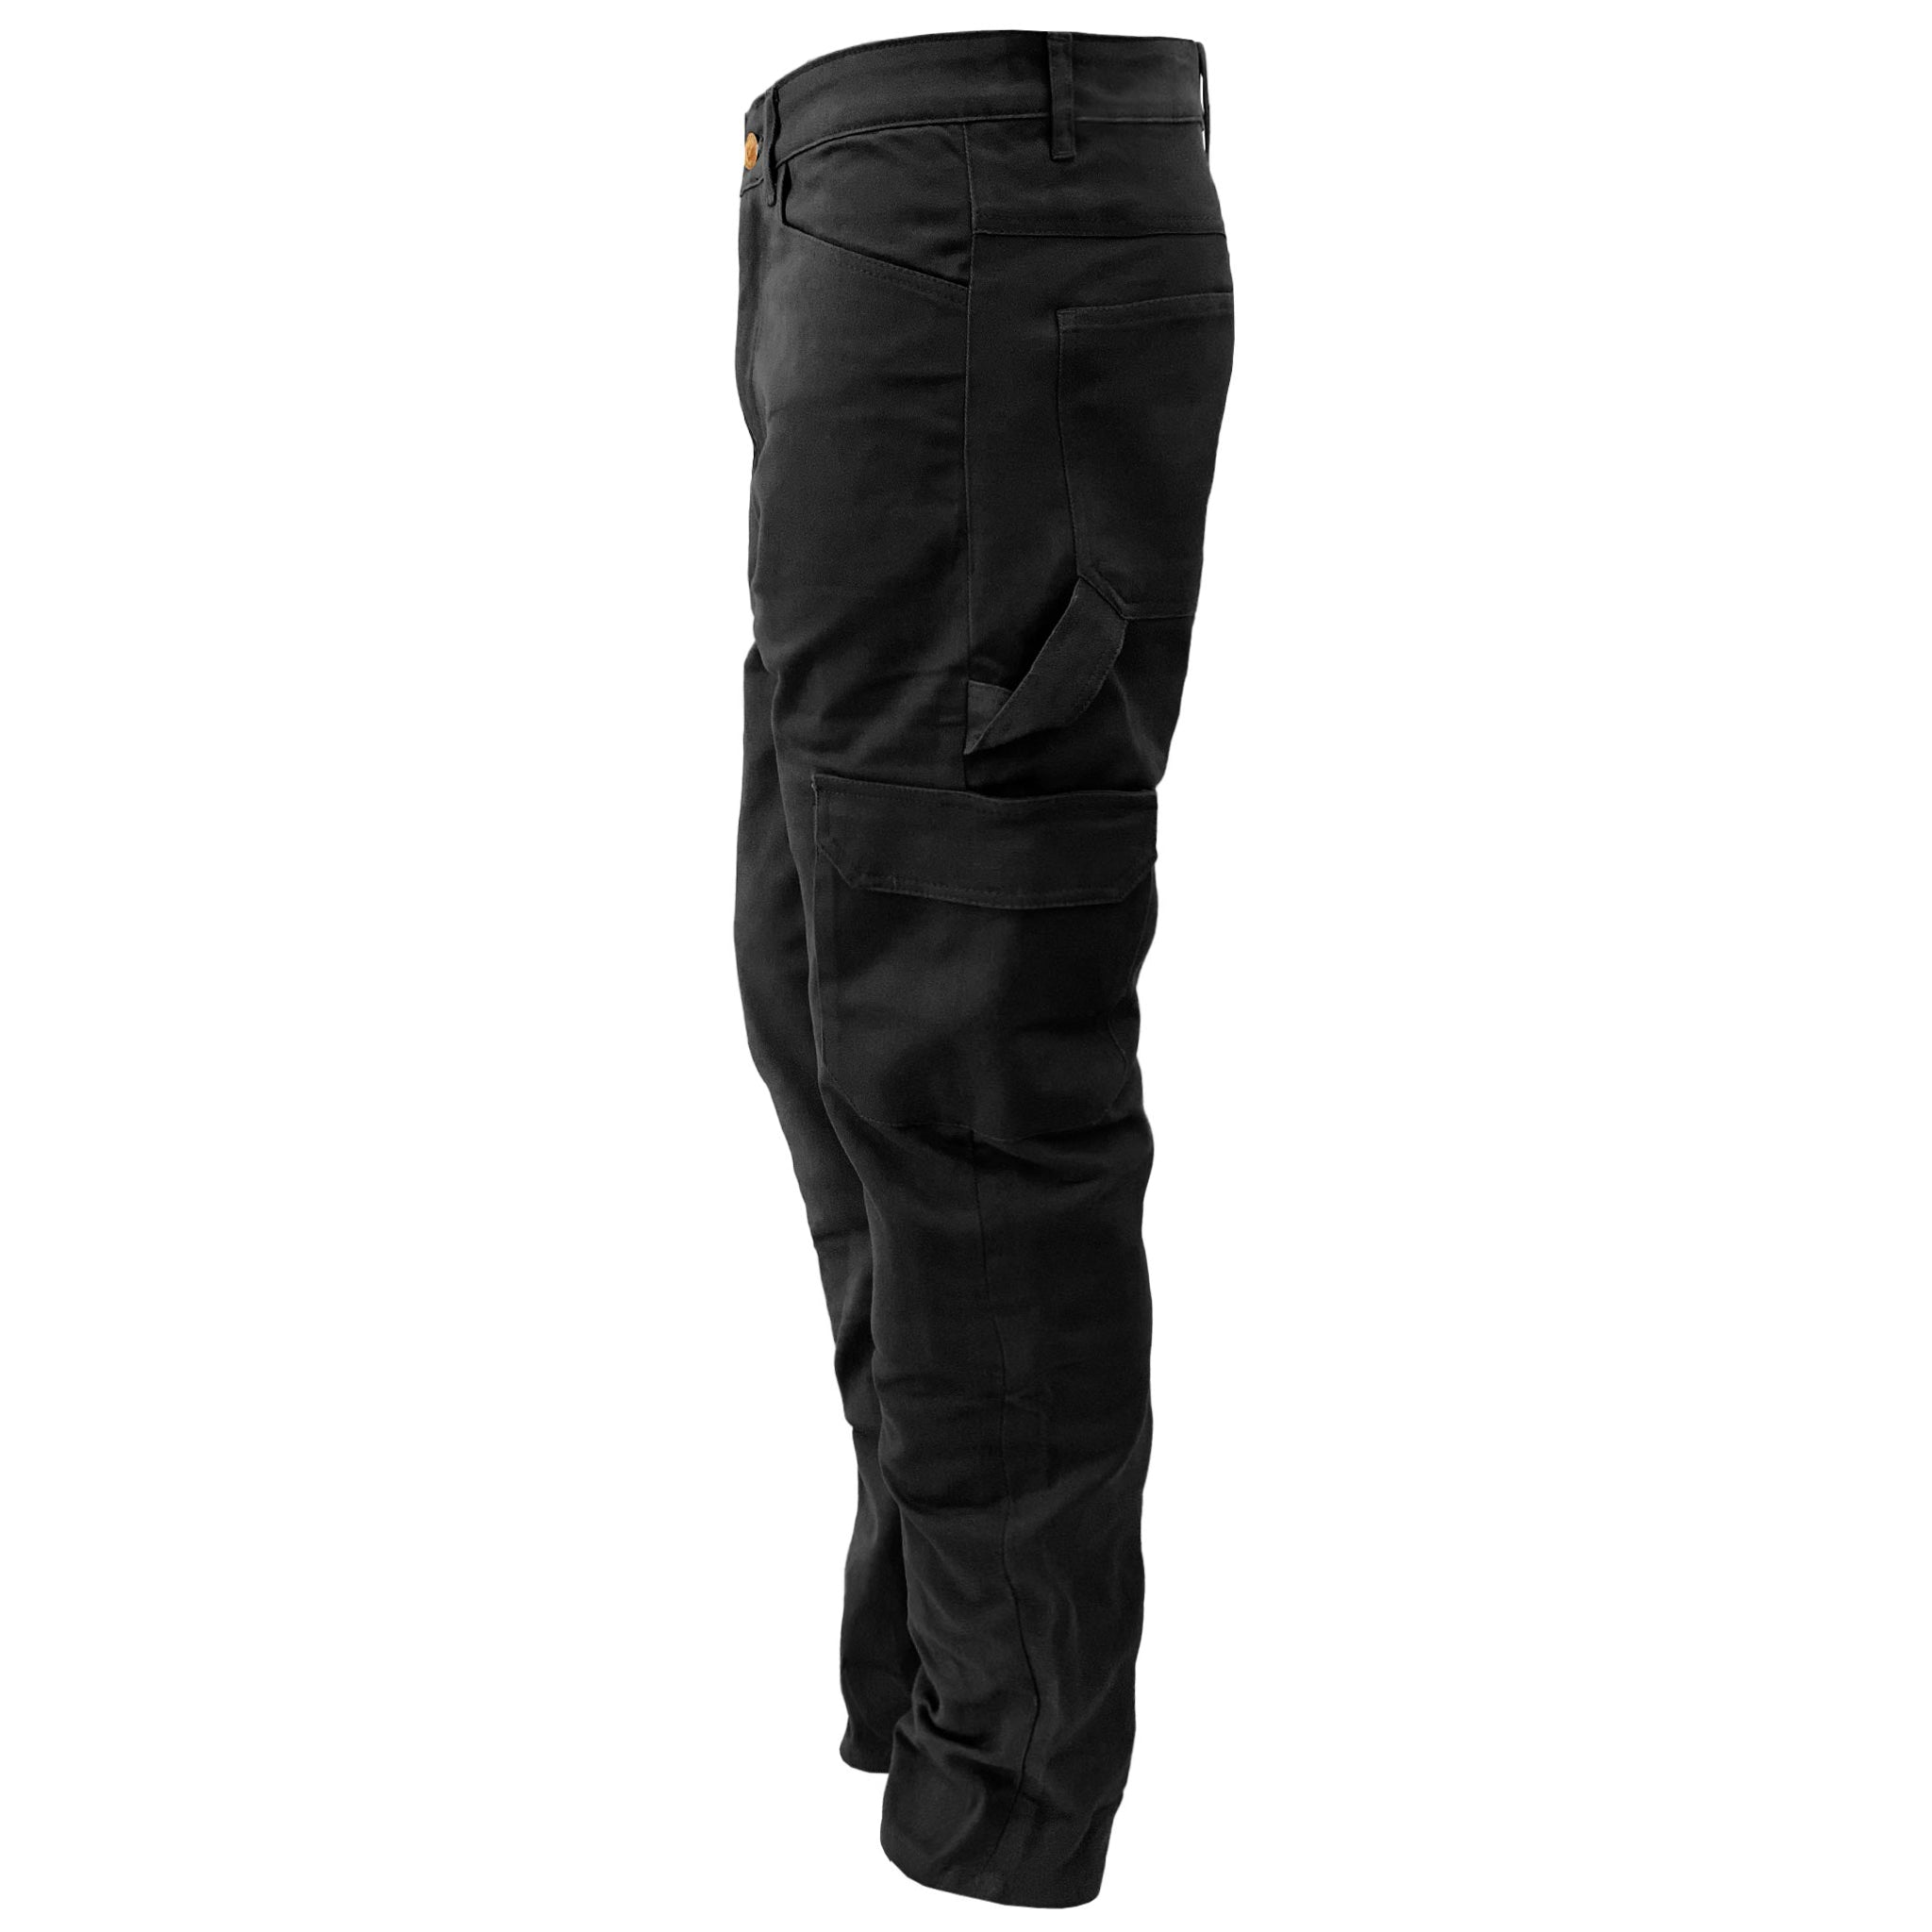 Relaxed Fit Cargo Pants - Black with Pads